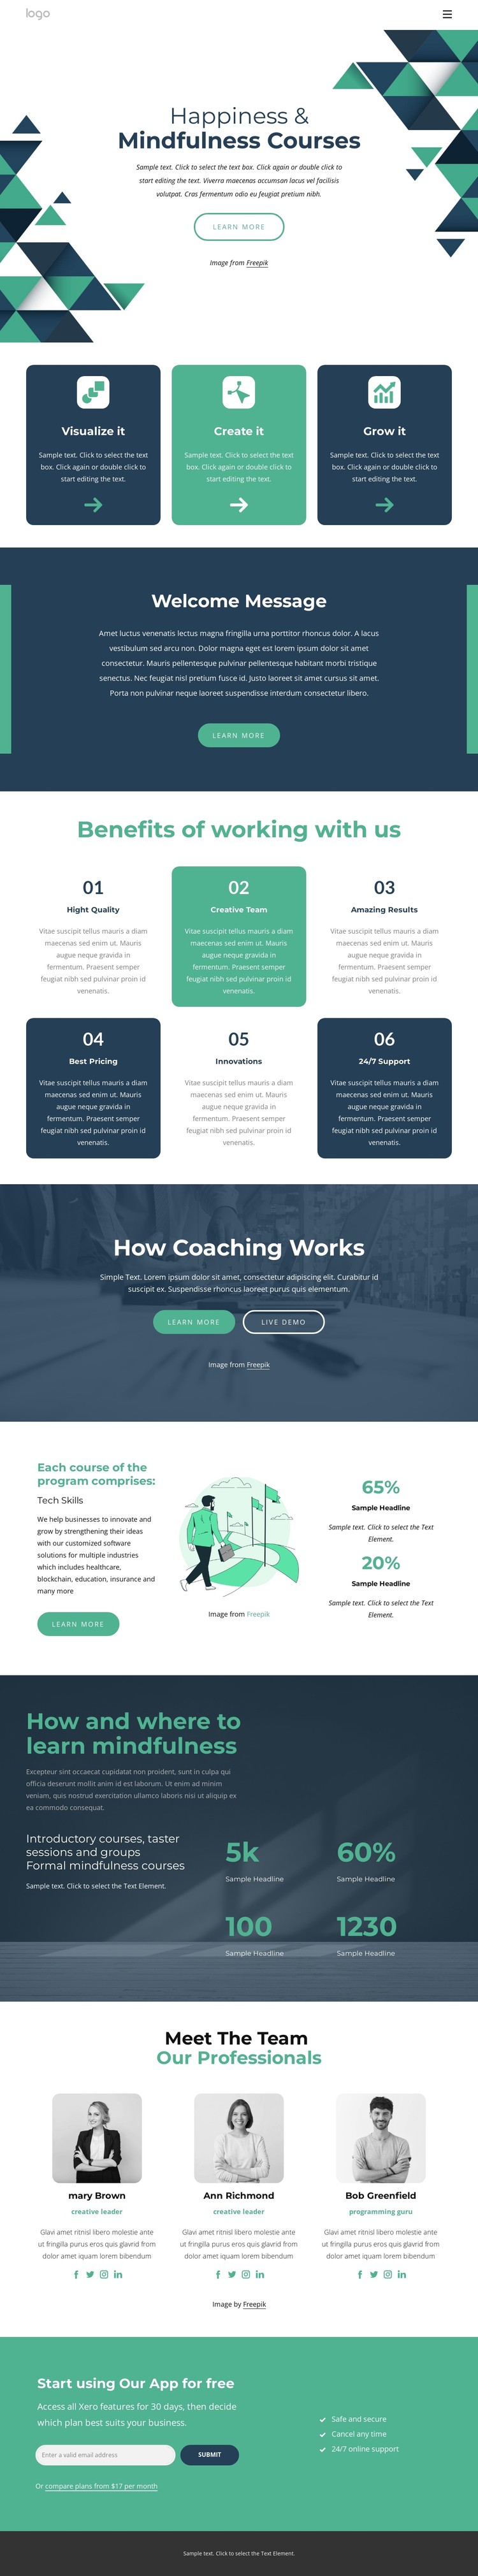 Top mindfulness courses CSS Template